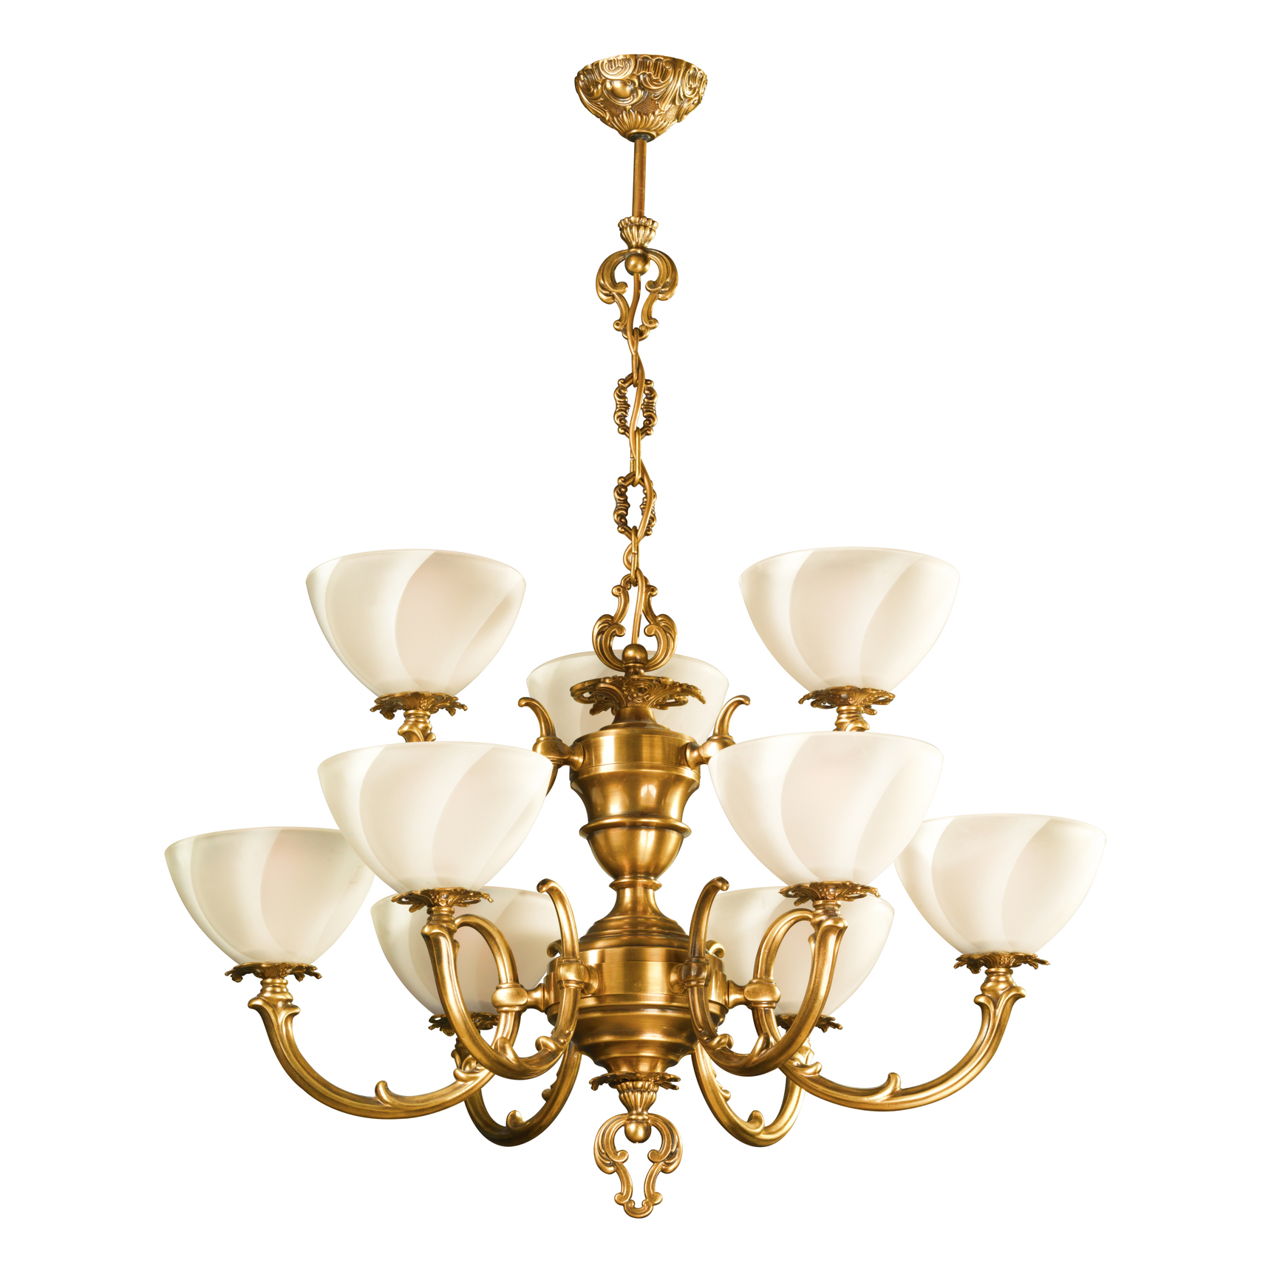 5 Homemade Brass Cleaner Recipes That, How Do You Clean A Brass Chandelier